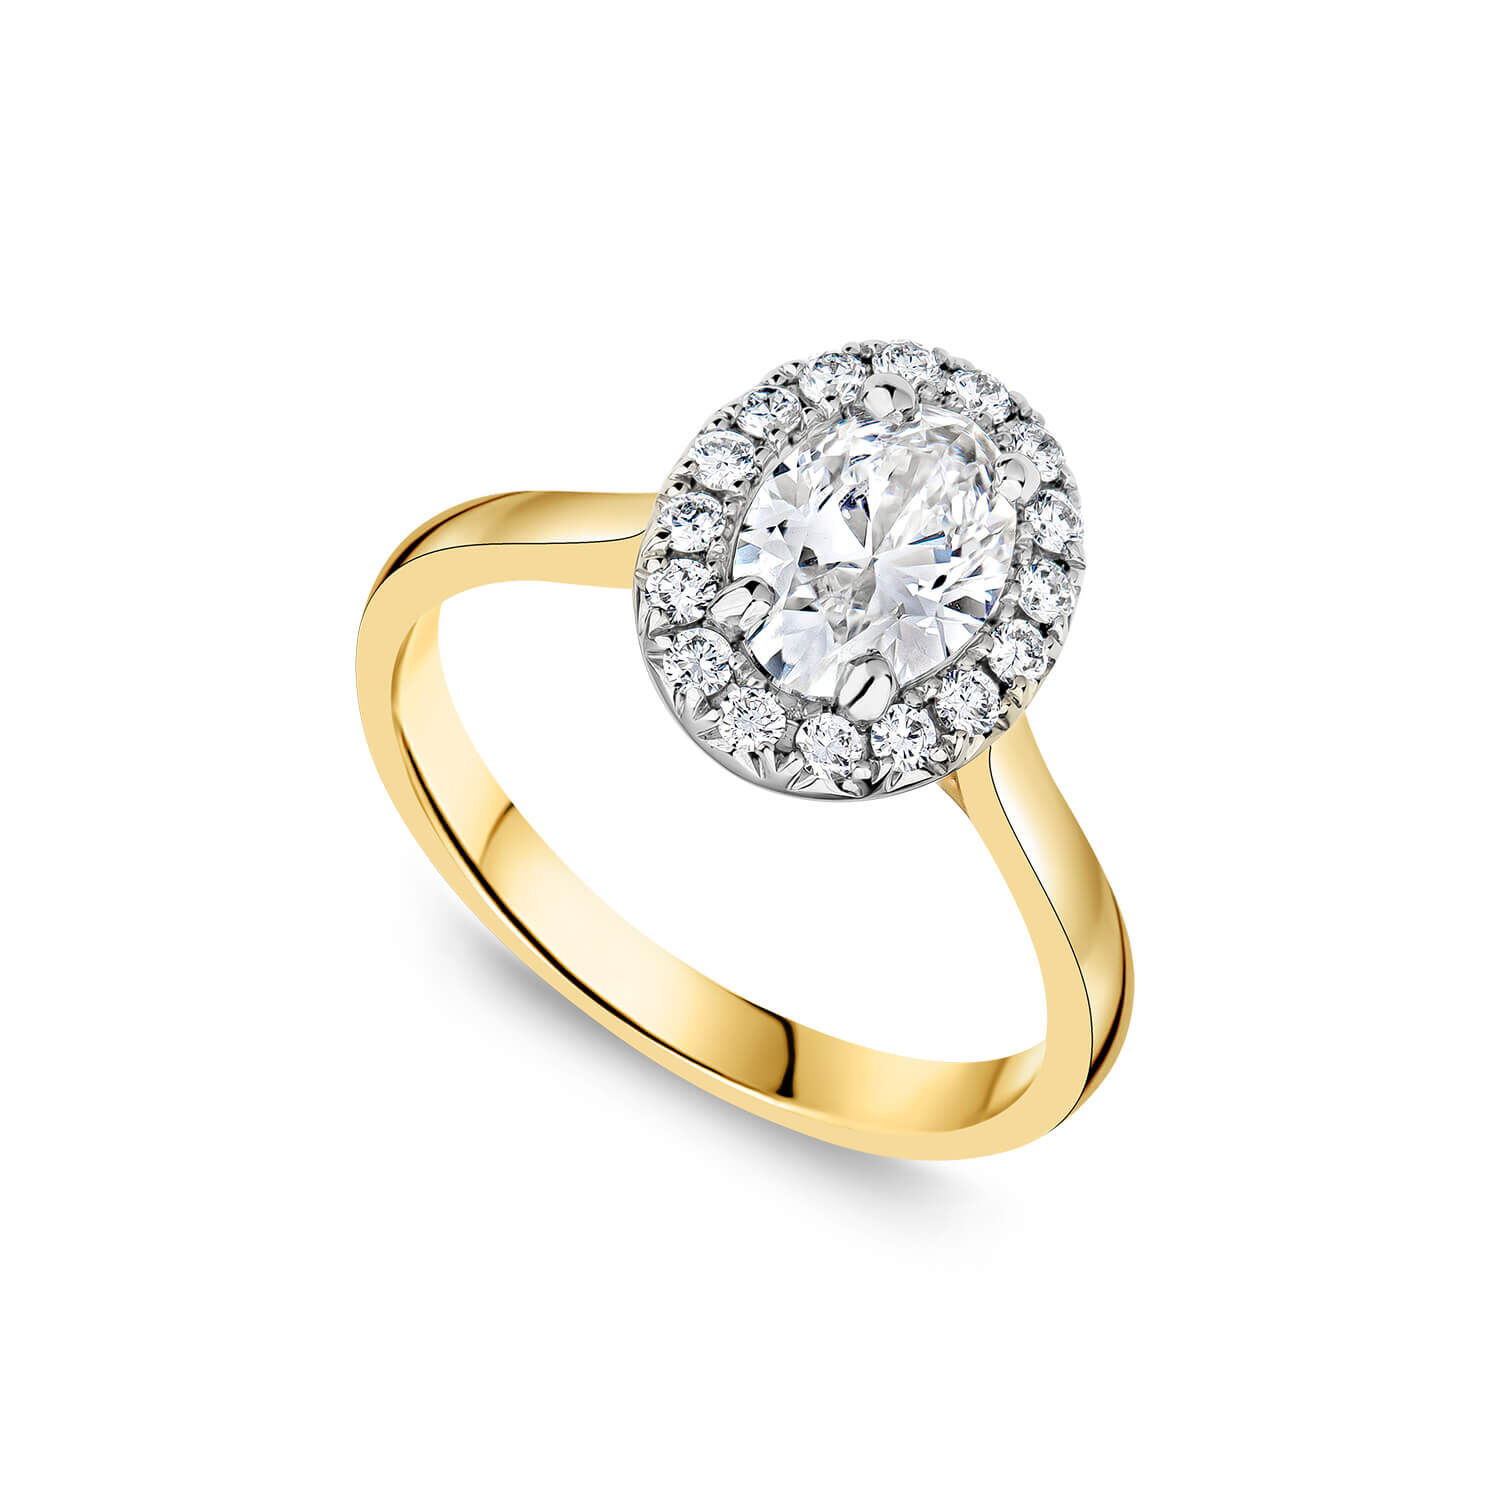 Born 18ct Yellow Gold 1.20ct Oval Halo Diamond Ring at Fraser Hart